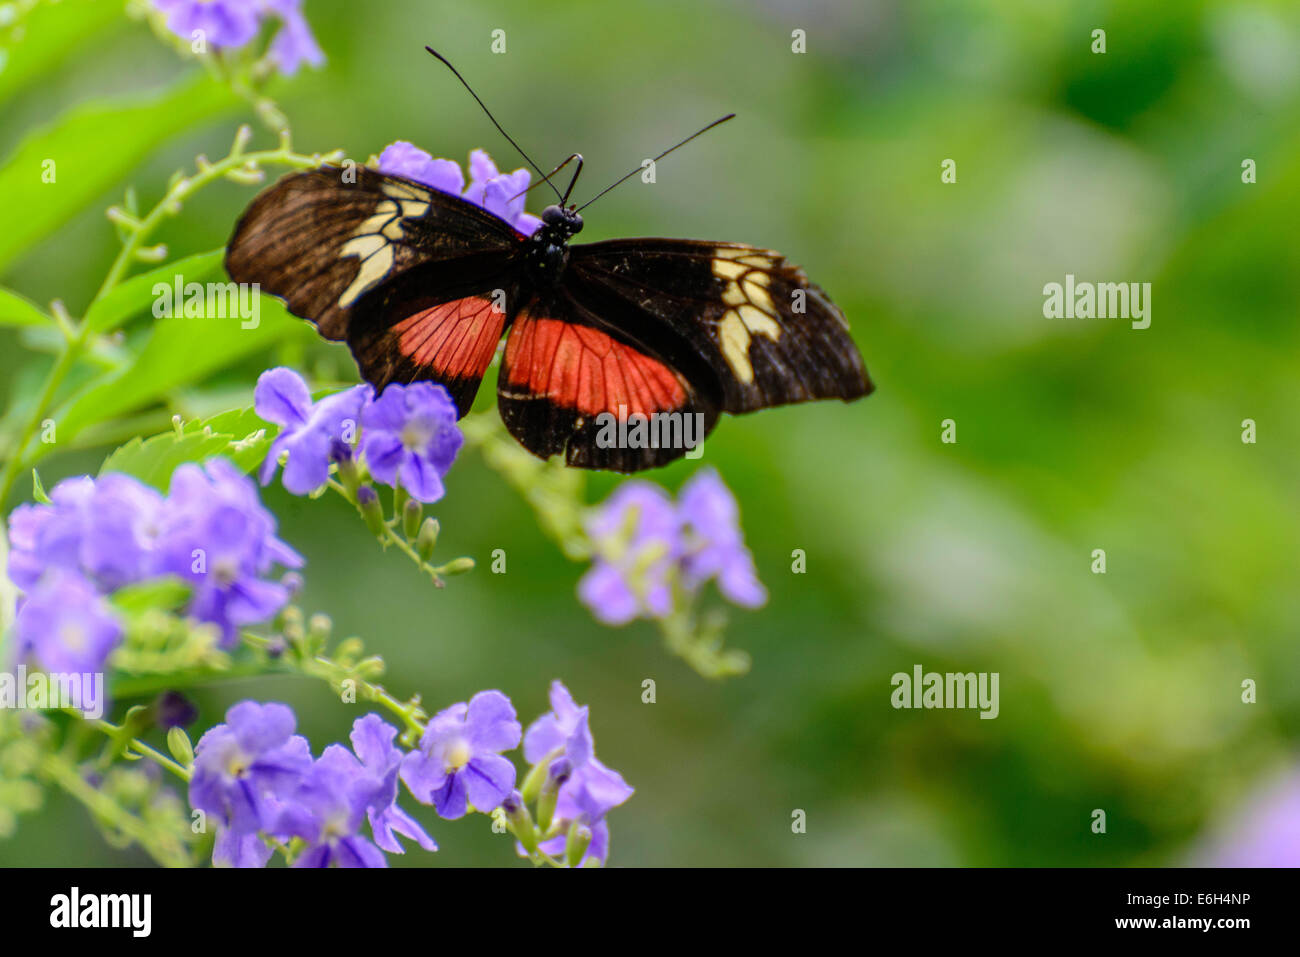 a red and black Common Postman butterfly in nature Stock Photo